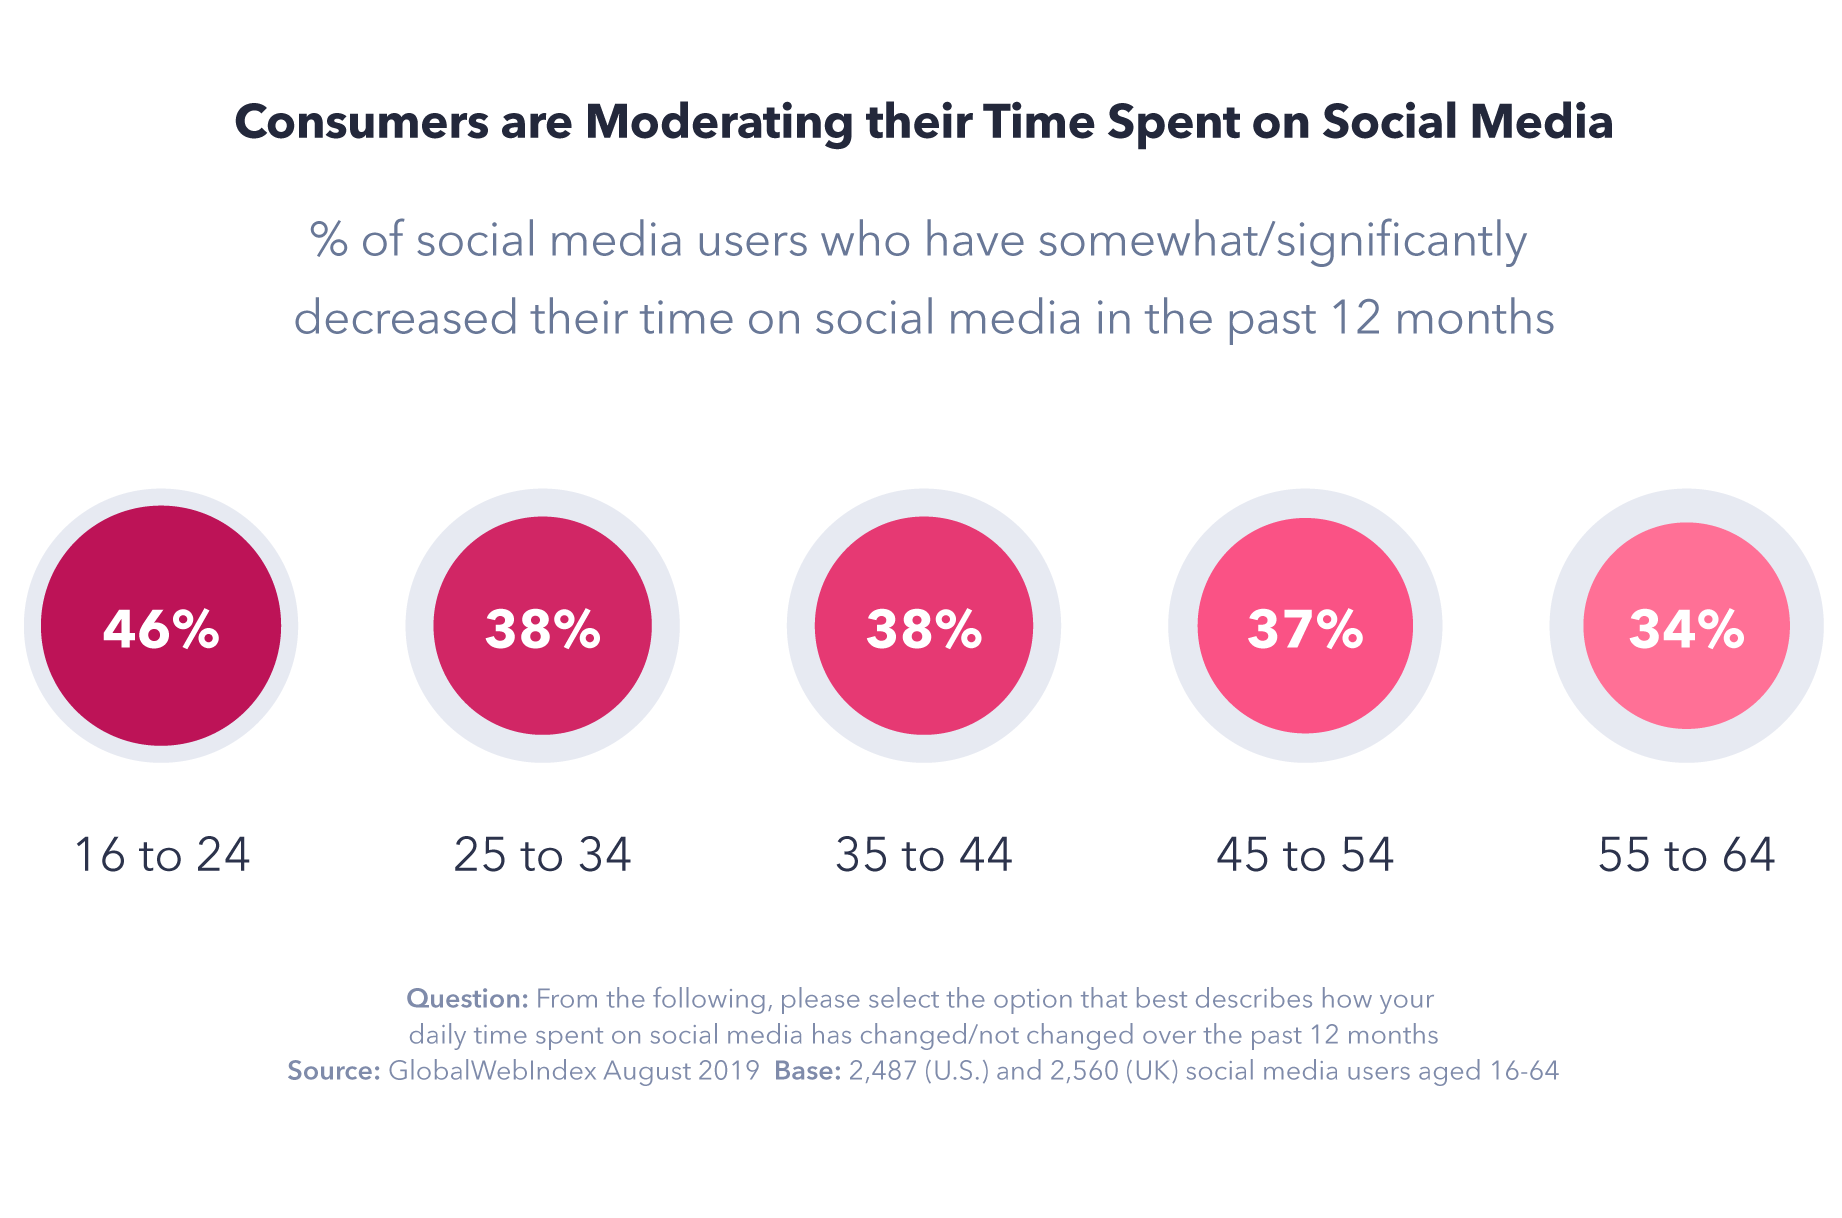 Consumers are moderating their time spent on social media - chart